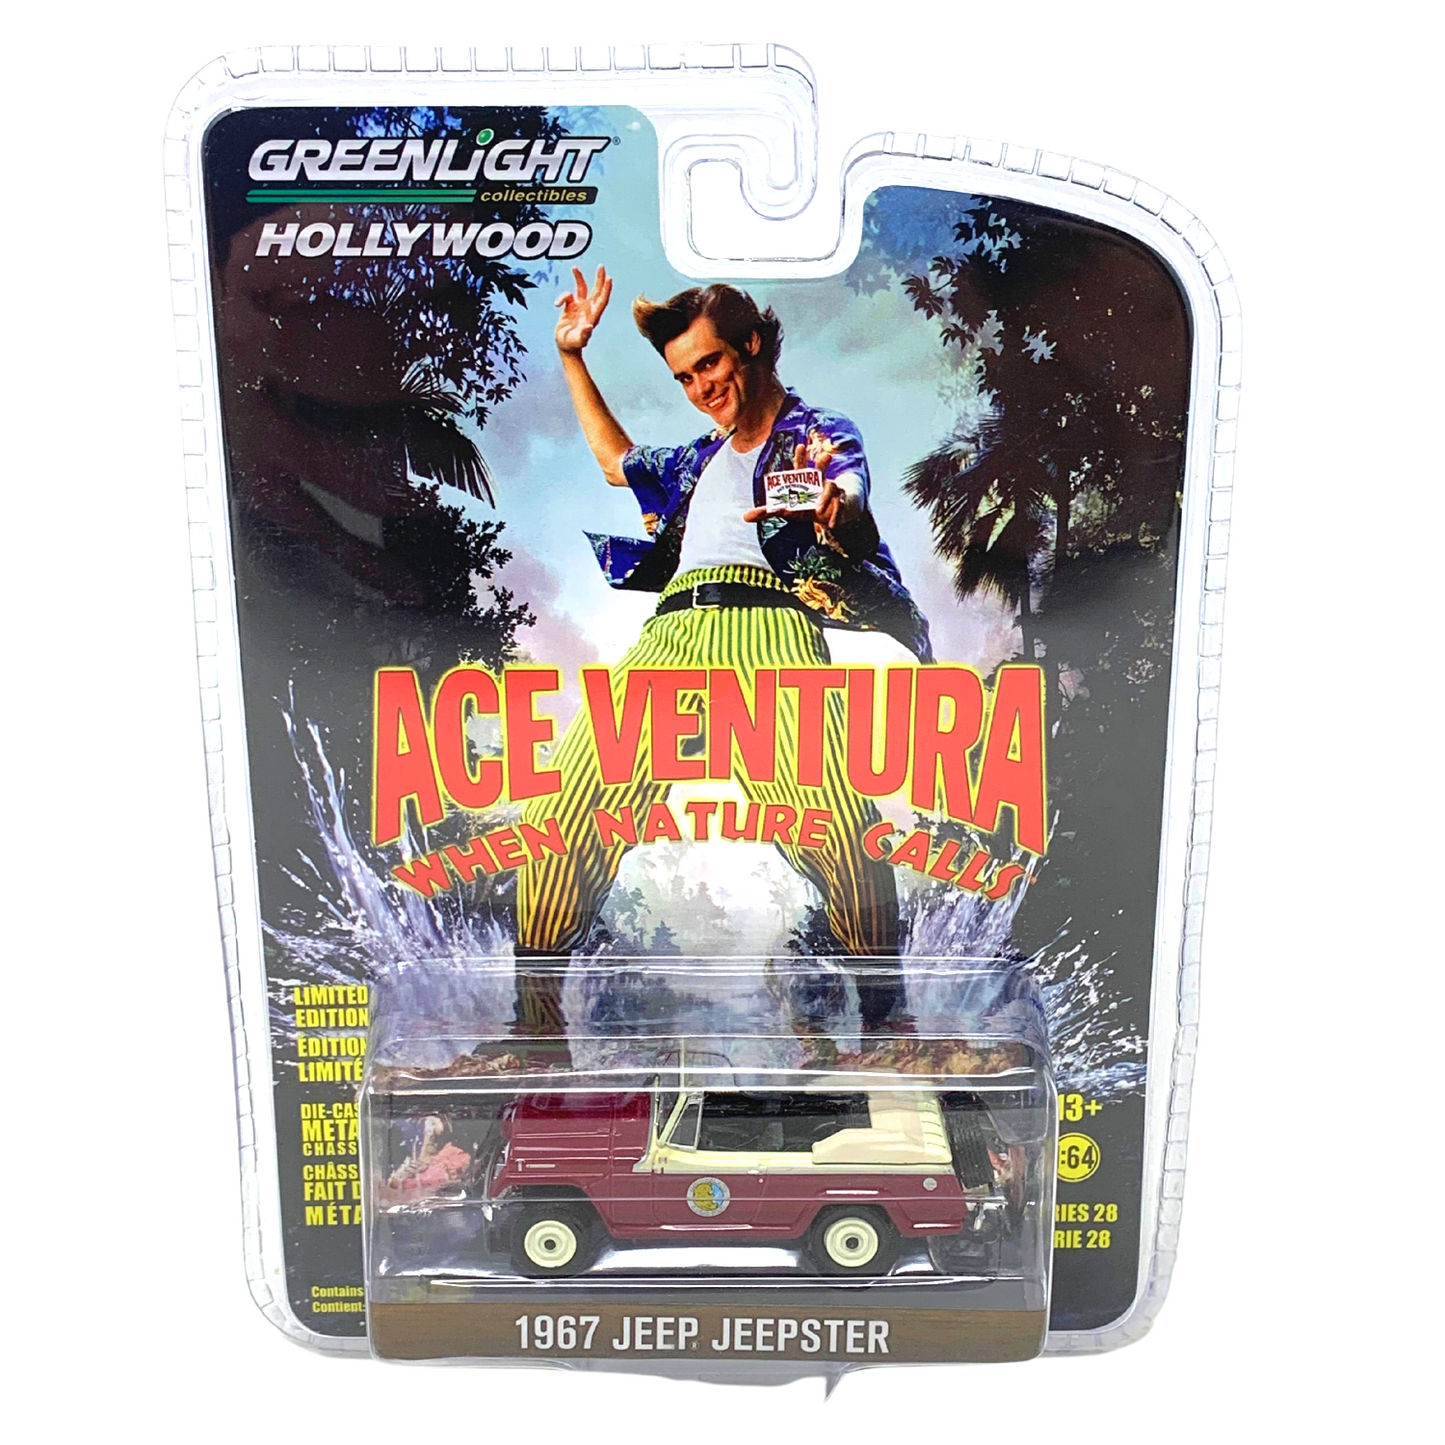 Greenlight Hollywood Series 28 Ace Ventura 1967 Jeep Jeepster 1:64 Diecast